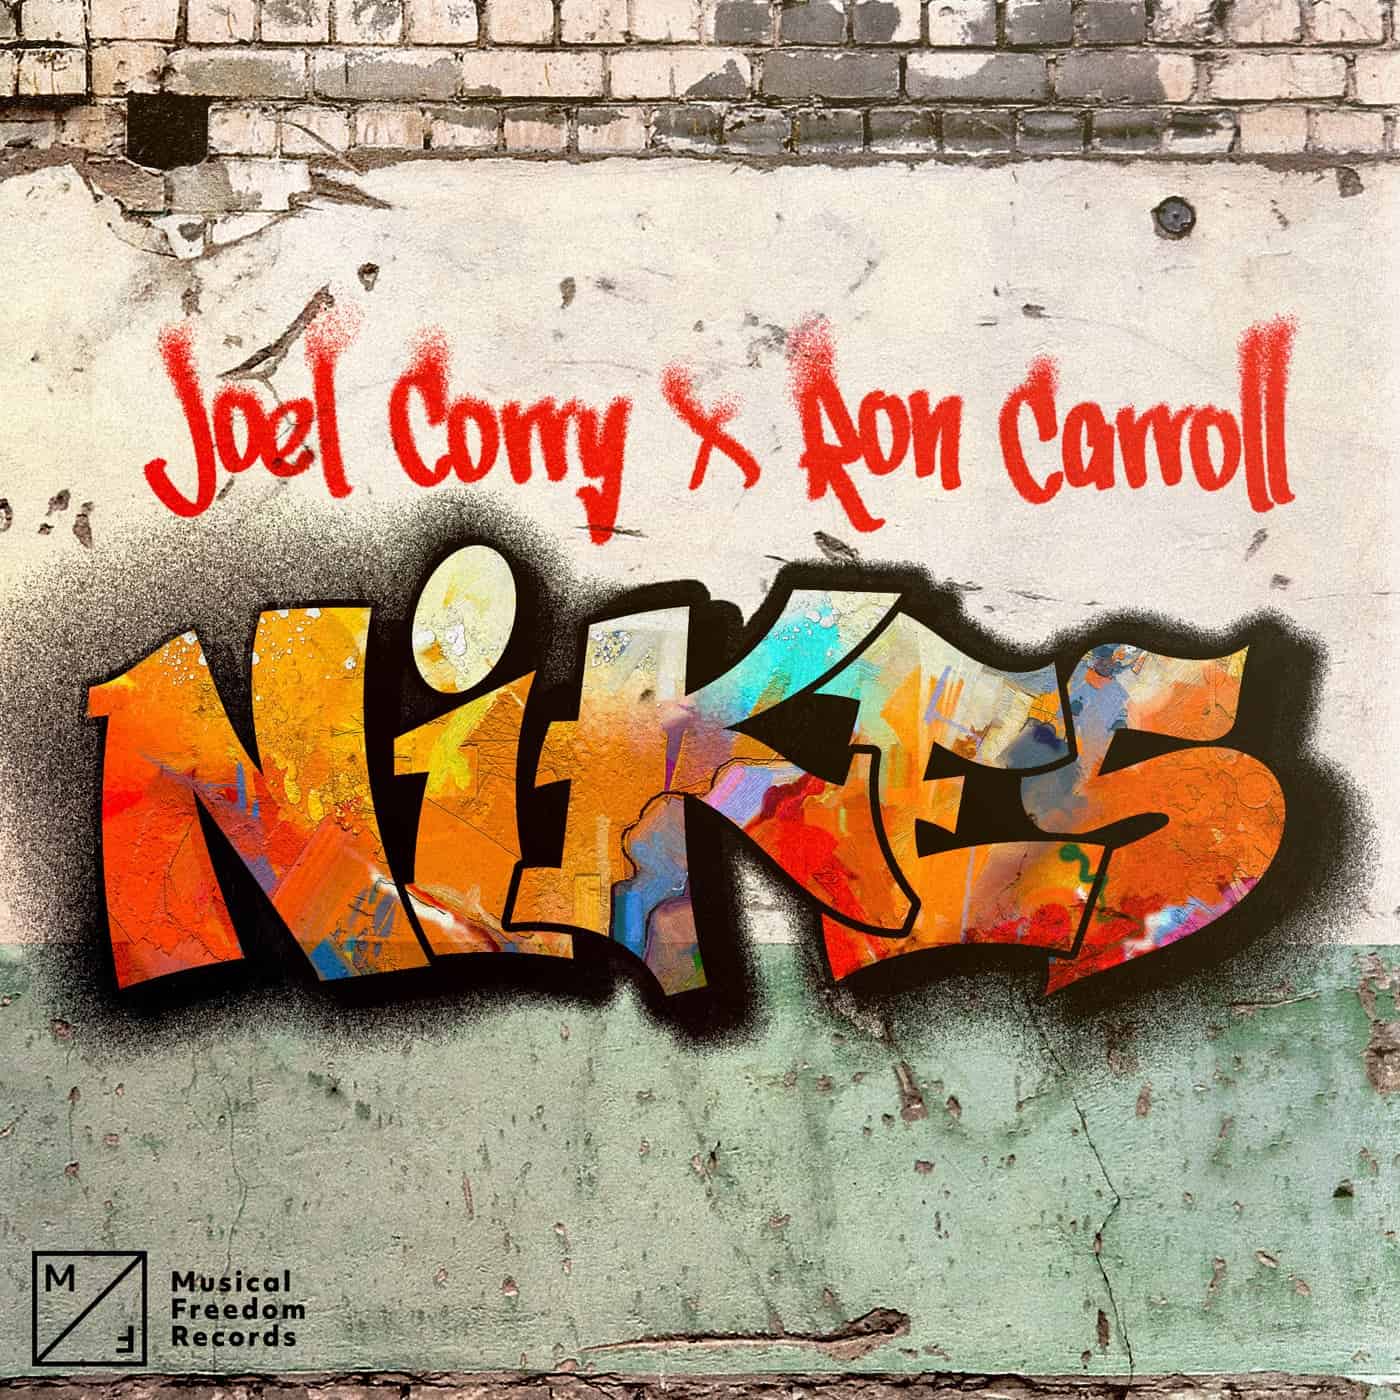 Download Ron Carroll, Joel Corry - Nikes (Extended Mix) on Electrobuzz